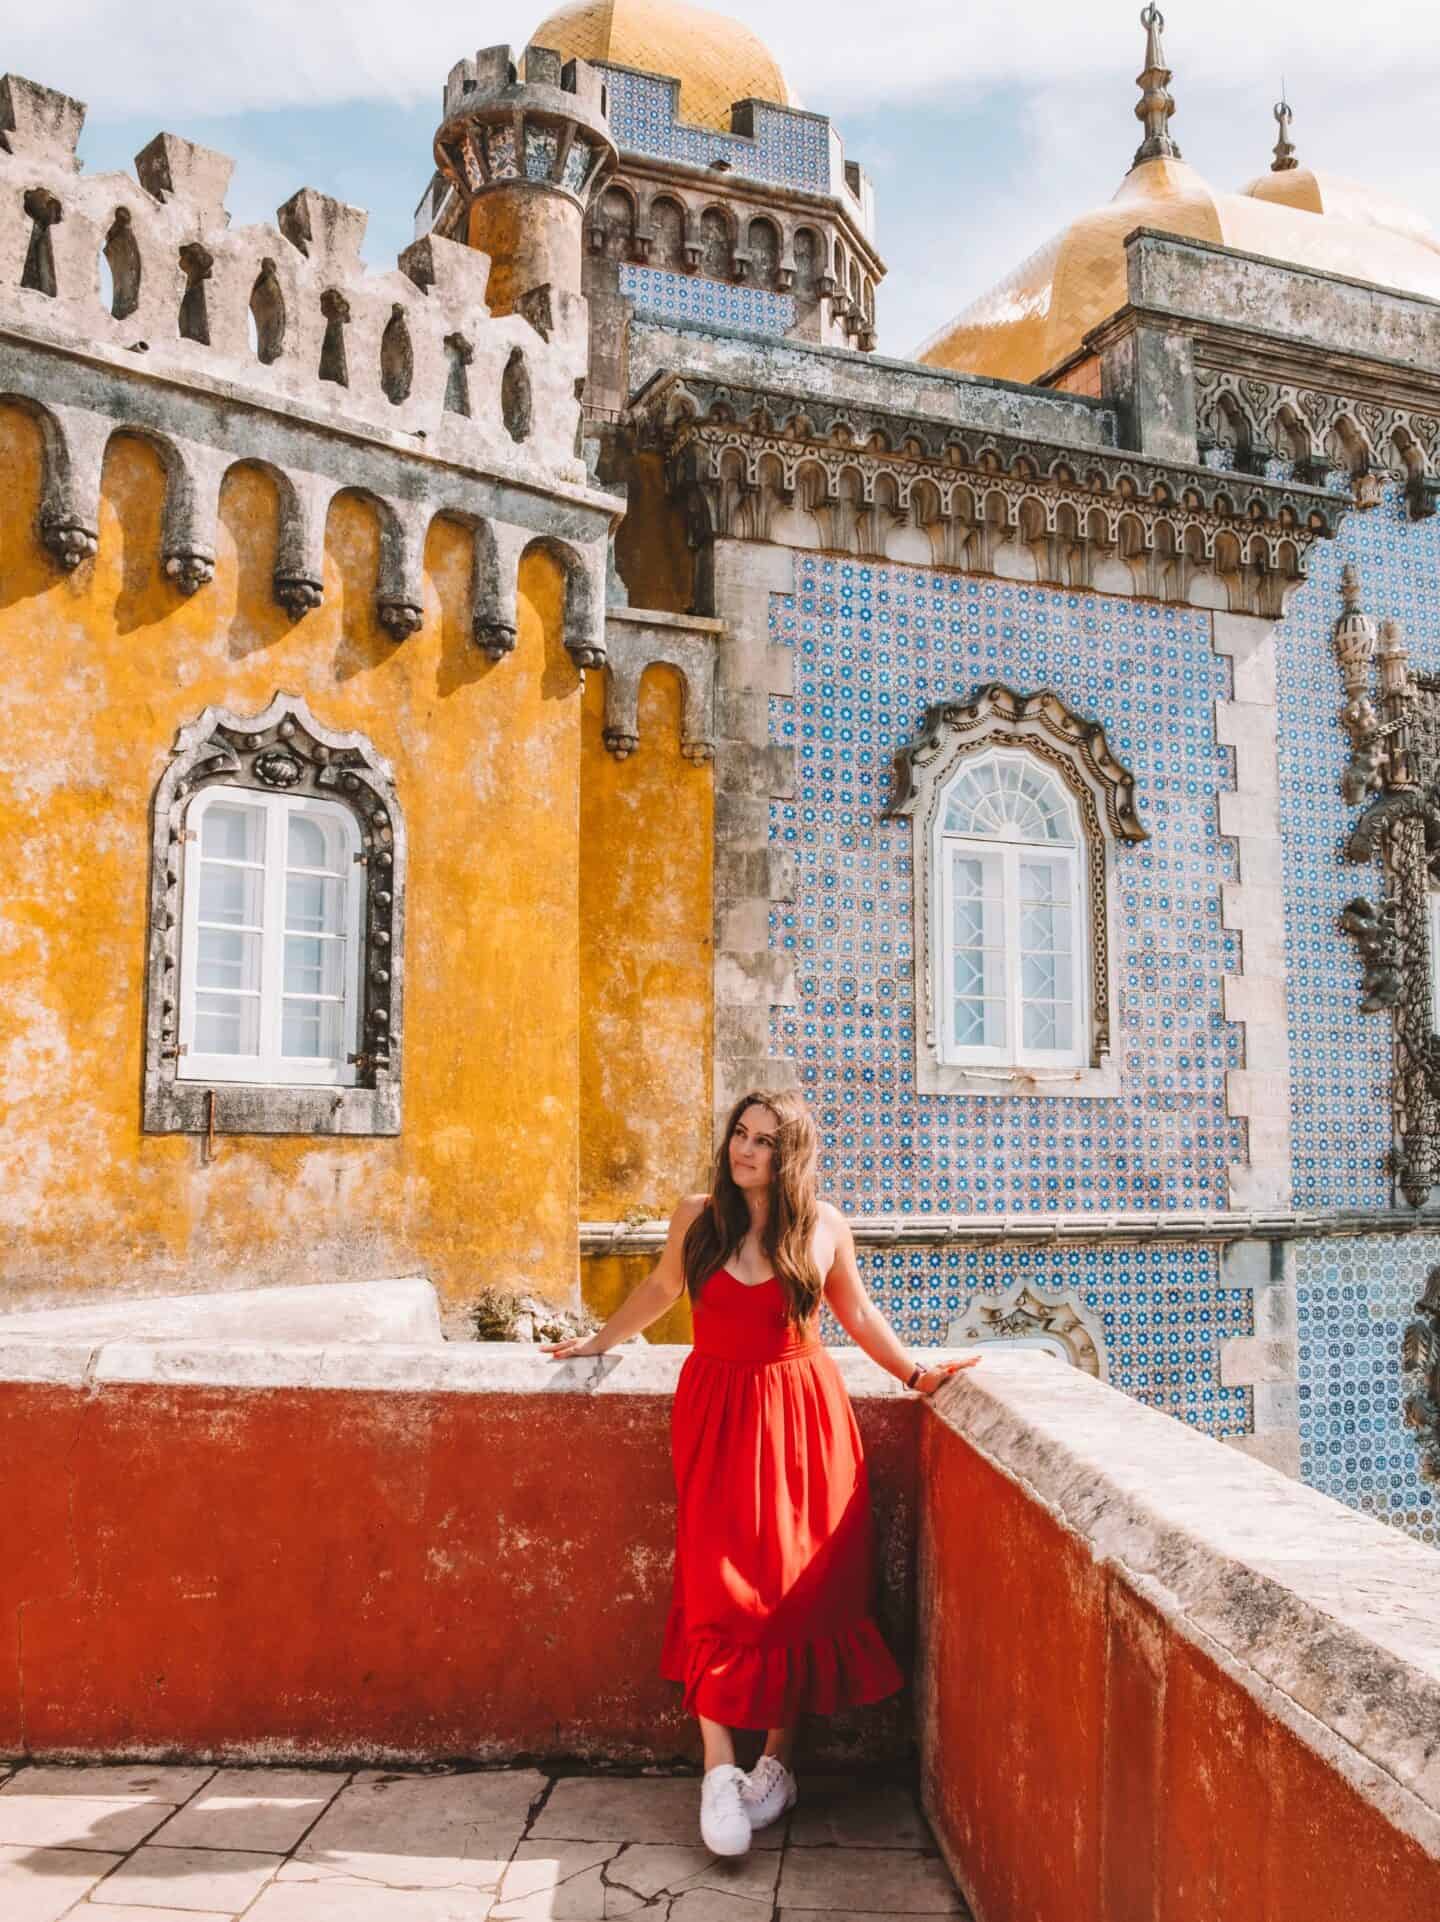 Me in front of the Pena Palace's yellow, red, and blue domes. 